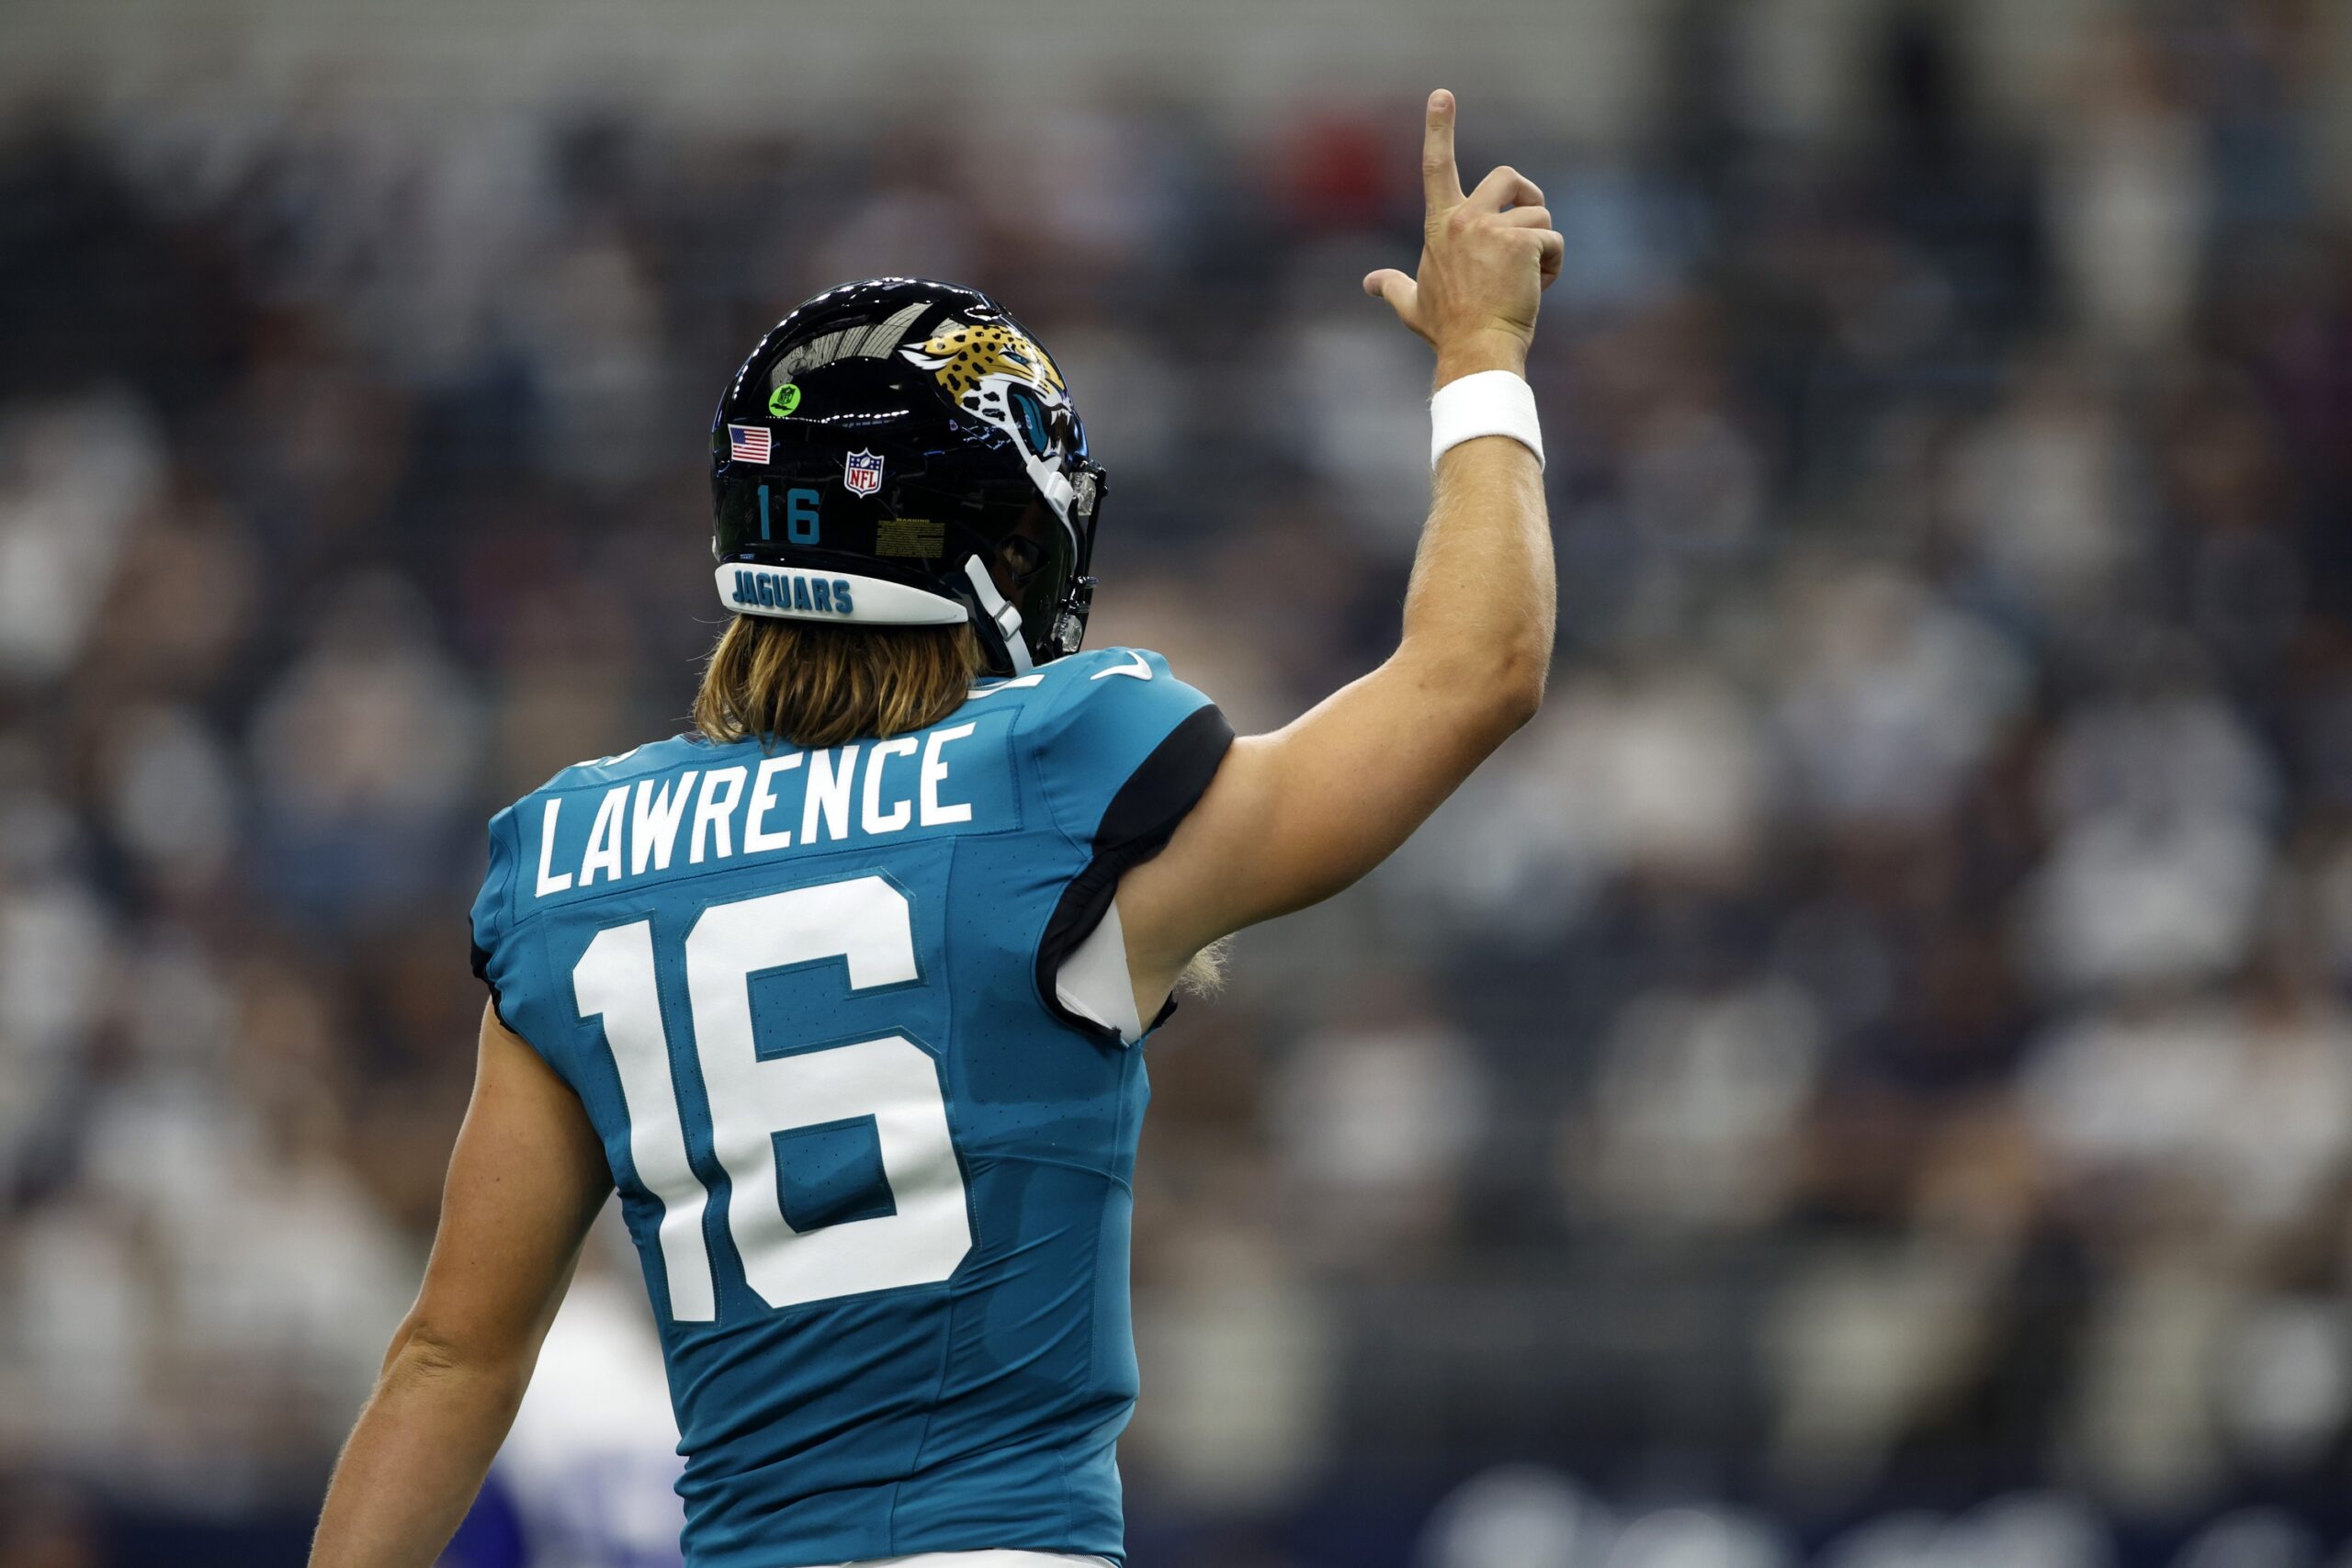 Trevor Lawrence Leads Jags to win - Fantasy Football News